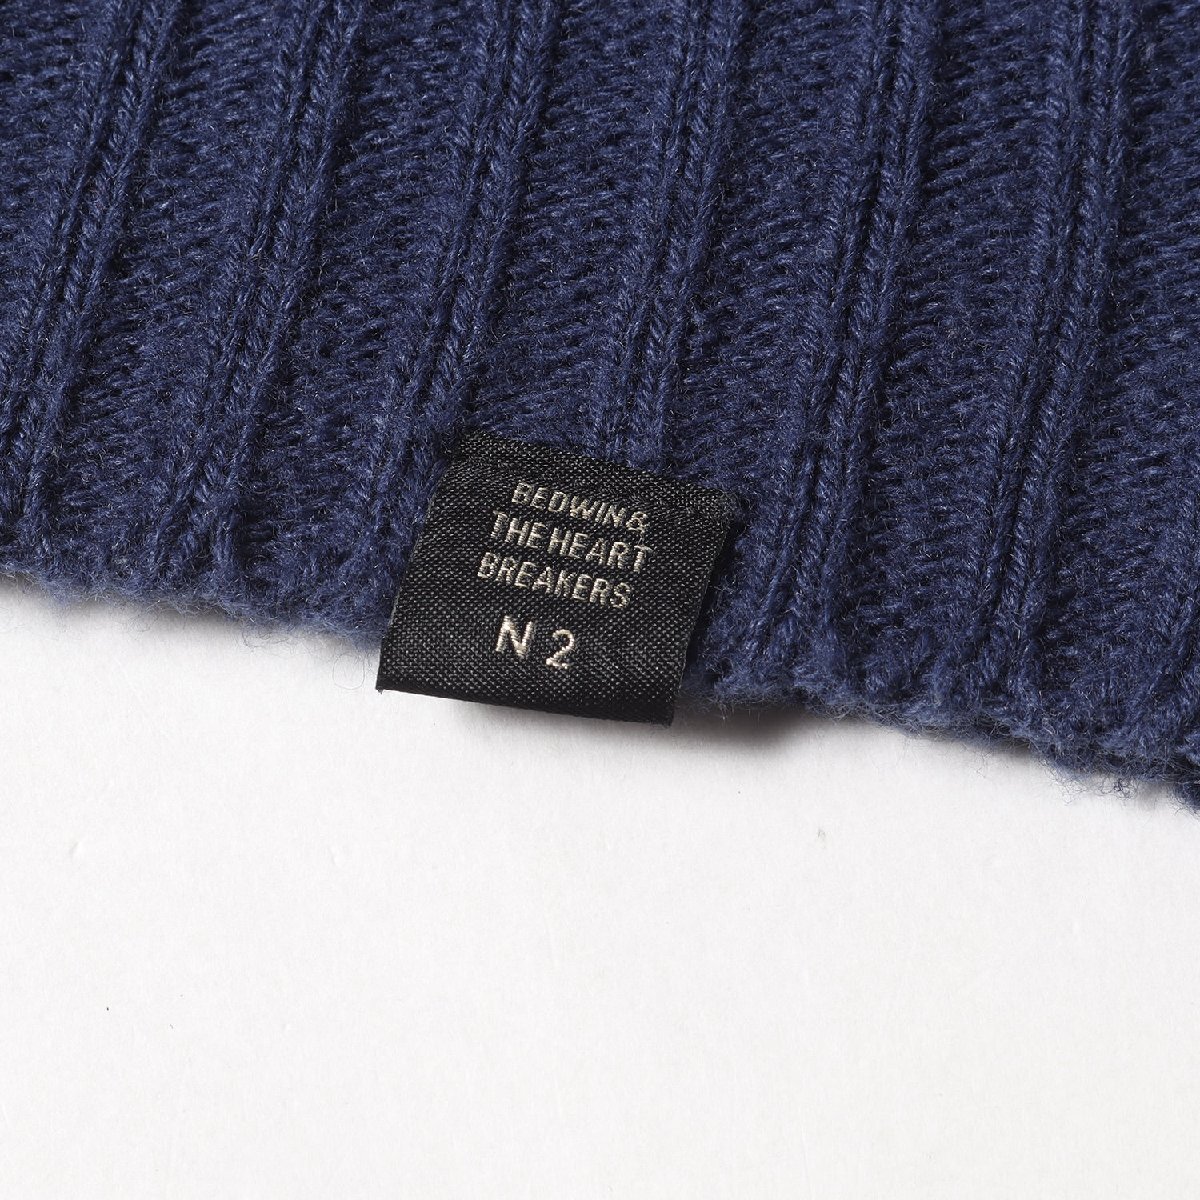 BEDWINbedo wing knitted size :2 17AW crew neck nordic knitted sweater C-NECK NORDIC SWEATER DANNY navy navy blue 